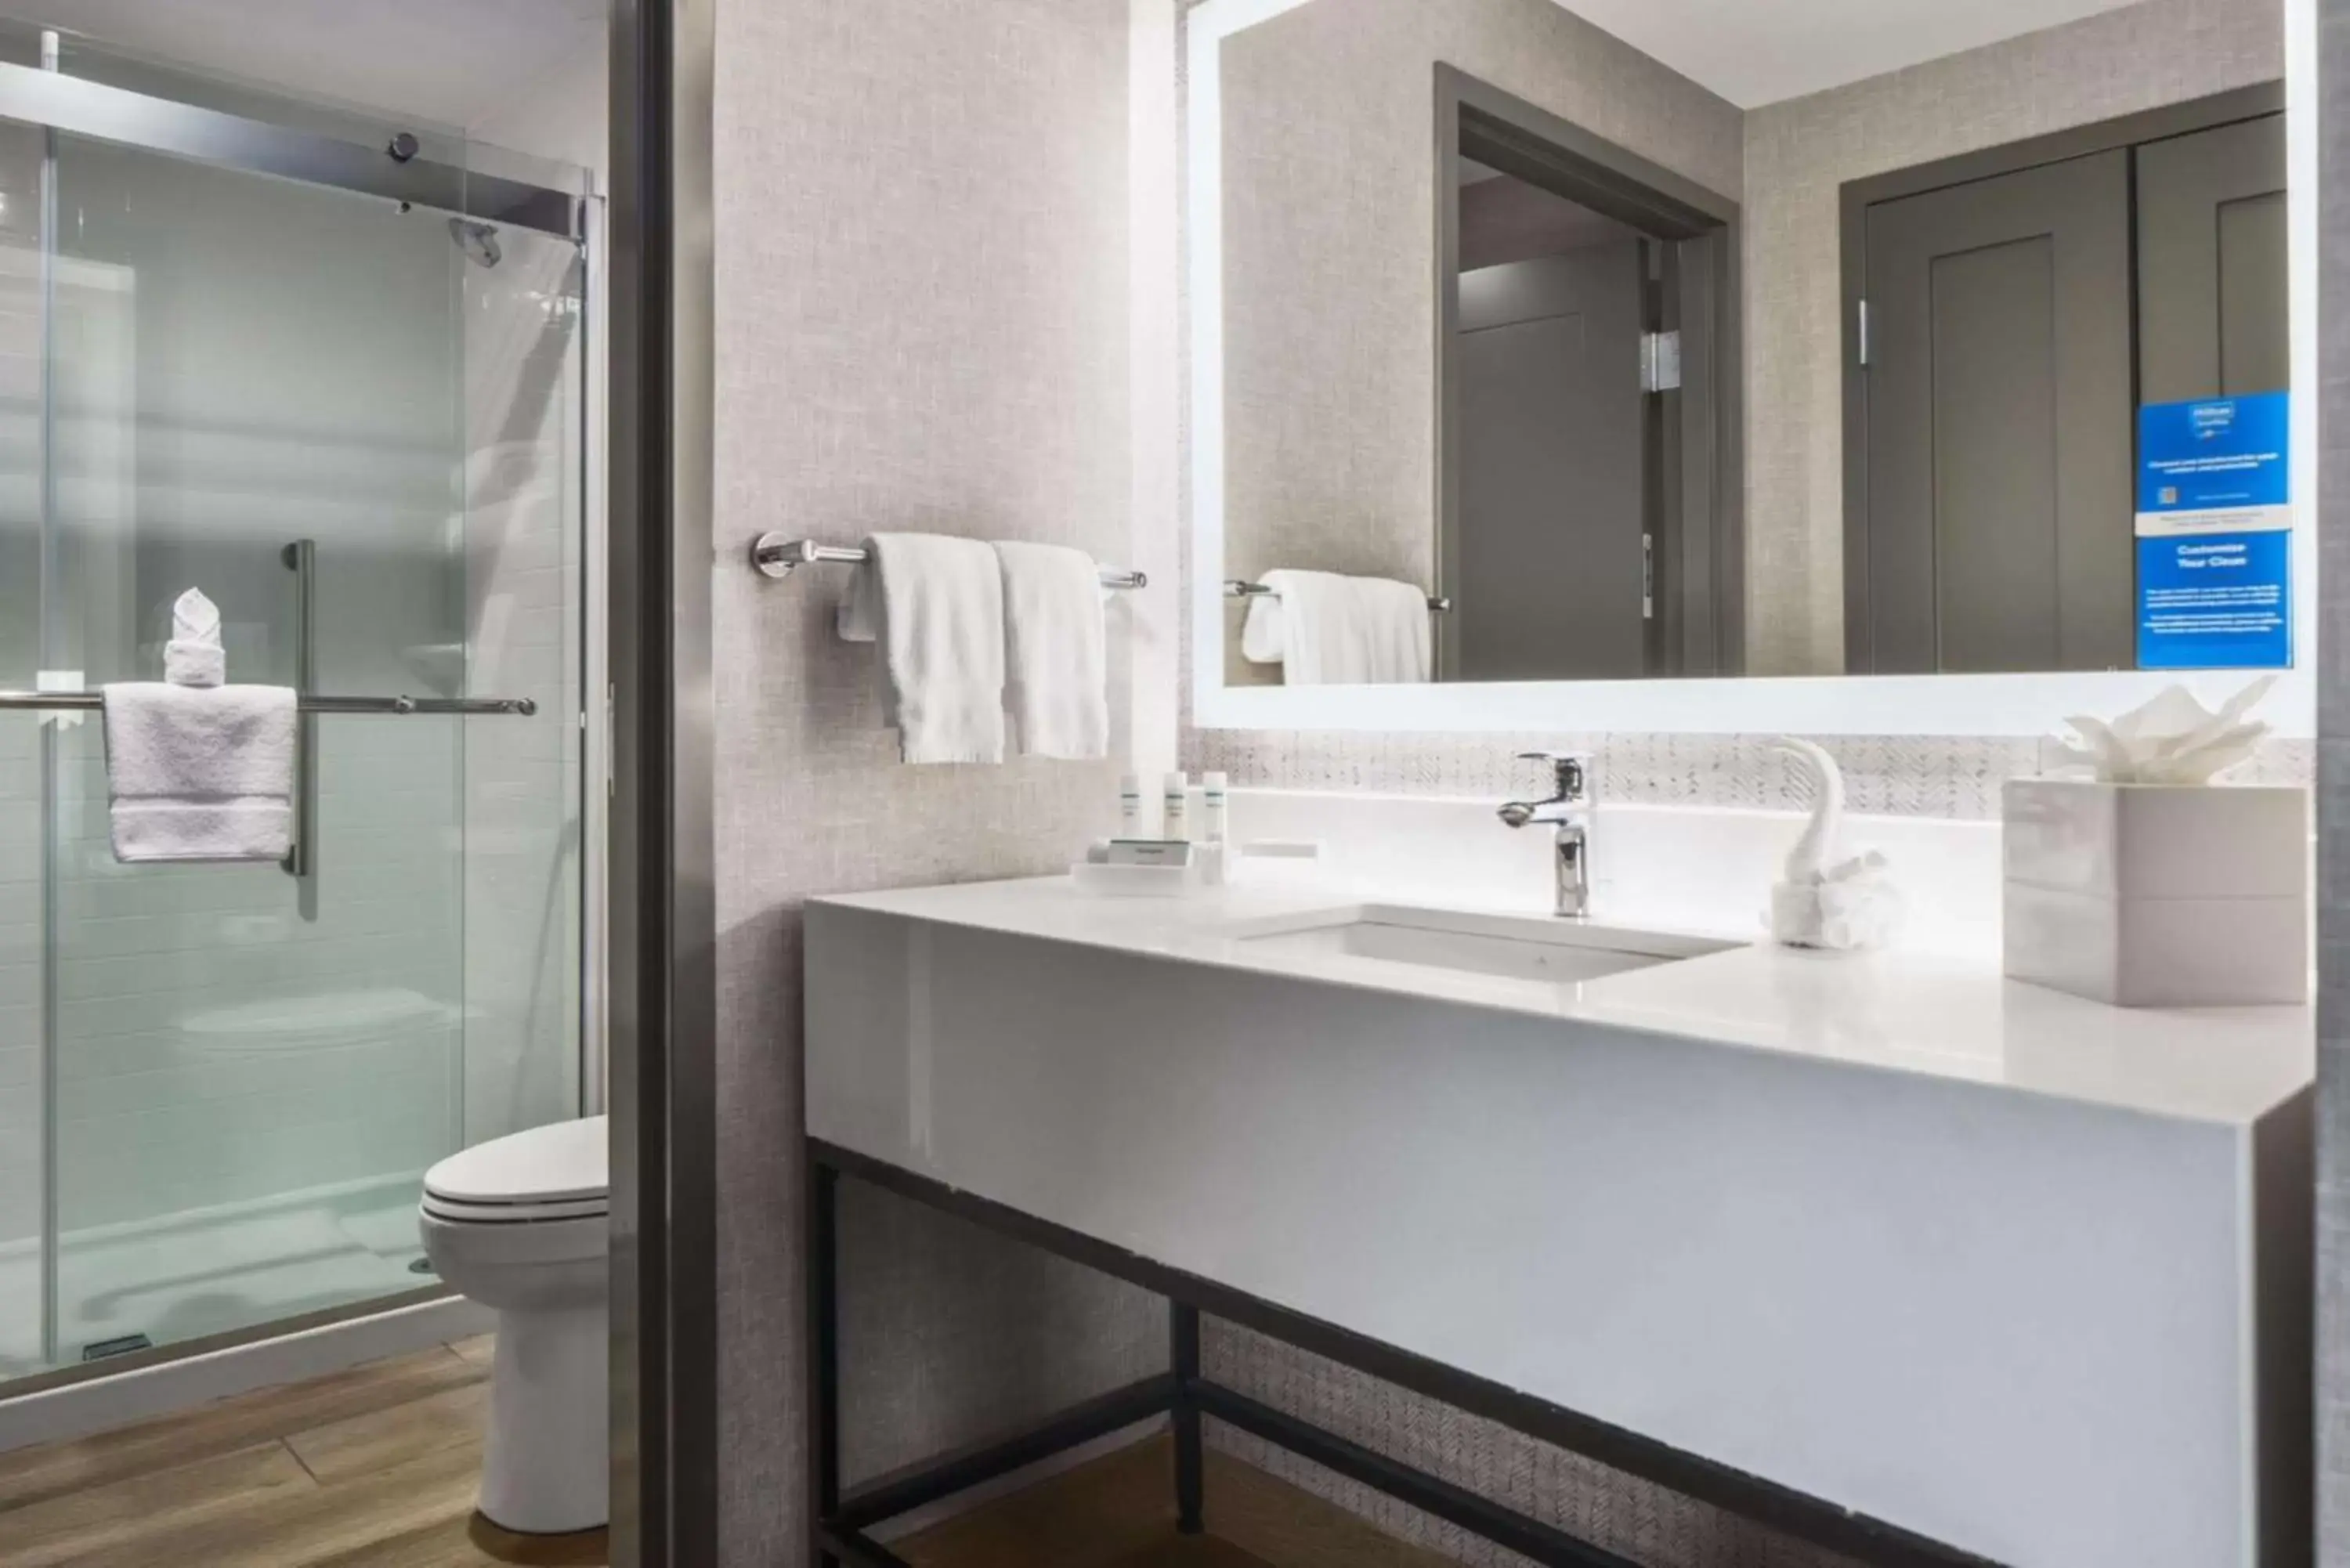 Bathroom in Homewood Suites by Hilton DFW Airport South, TX